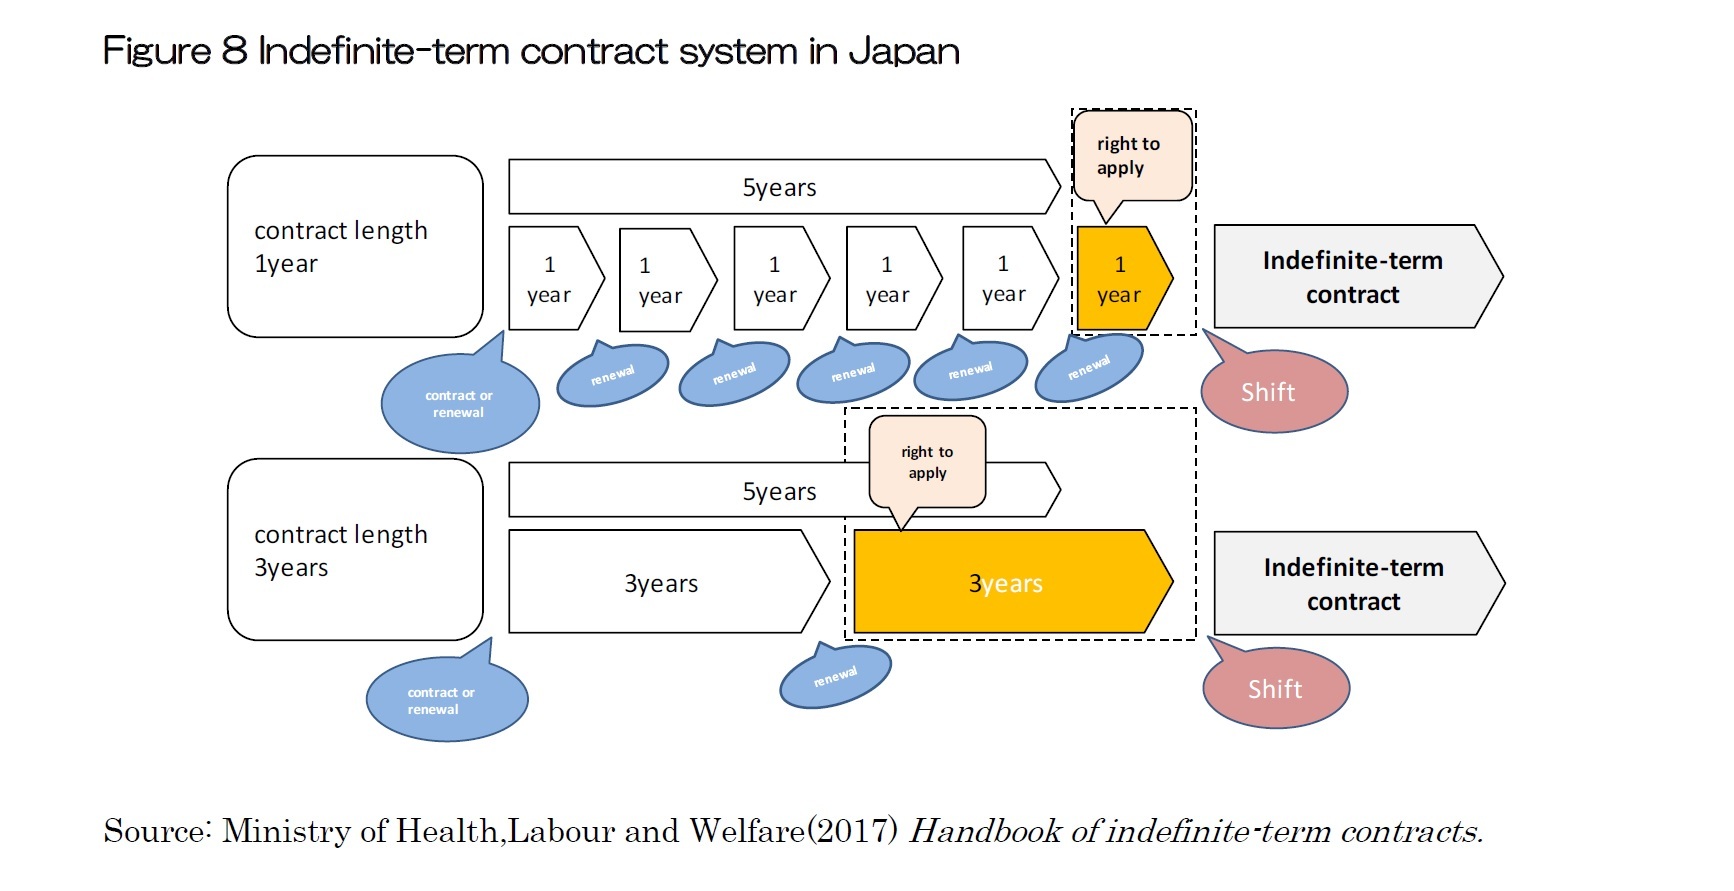 Figure 8 Indefinite-term contract system in Japan